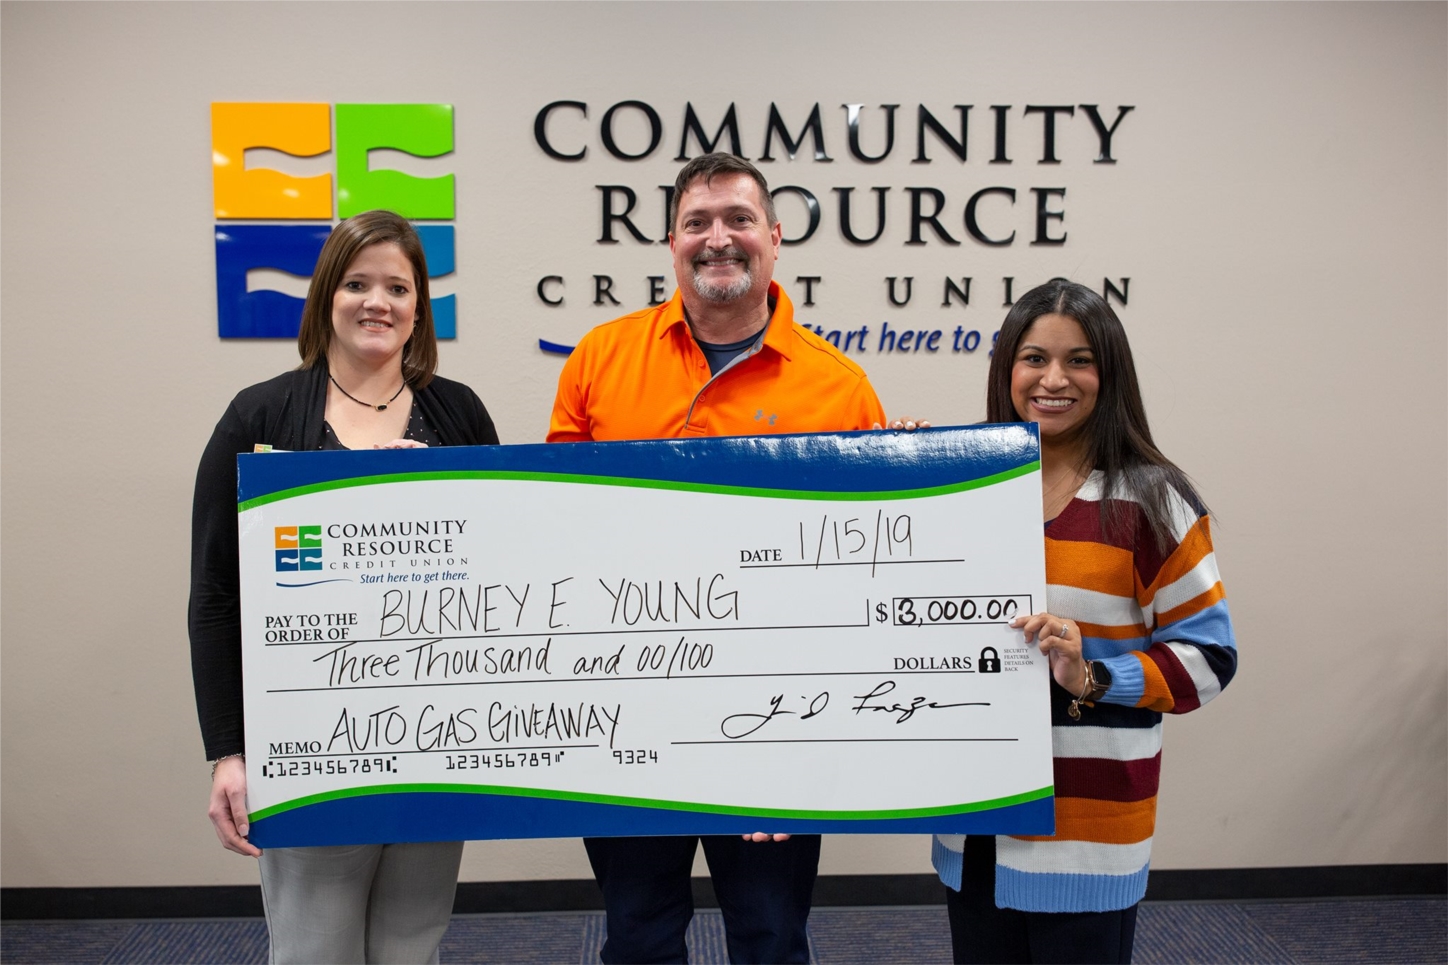 CRCU member Burney E. Young for winning the "Burn Rubber, Not Cash" Auto Loan sweepstakes contest!!! Mr. Young was presented with a check in the amount of $3,000 